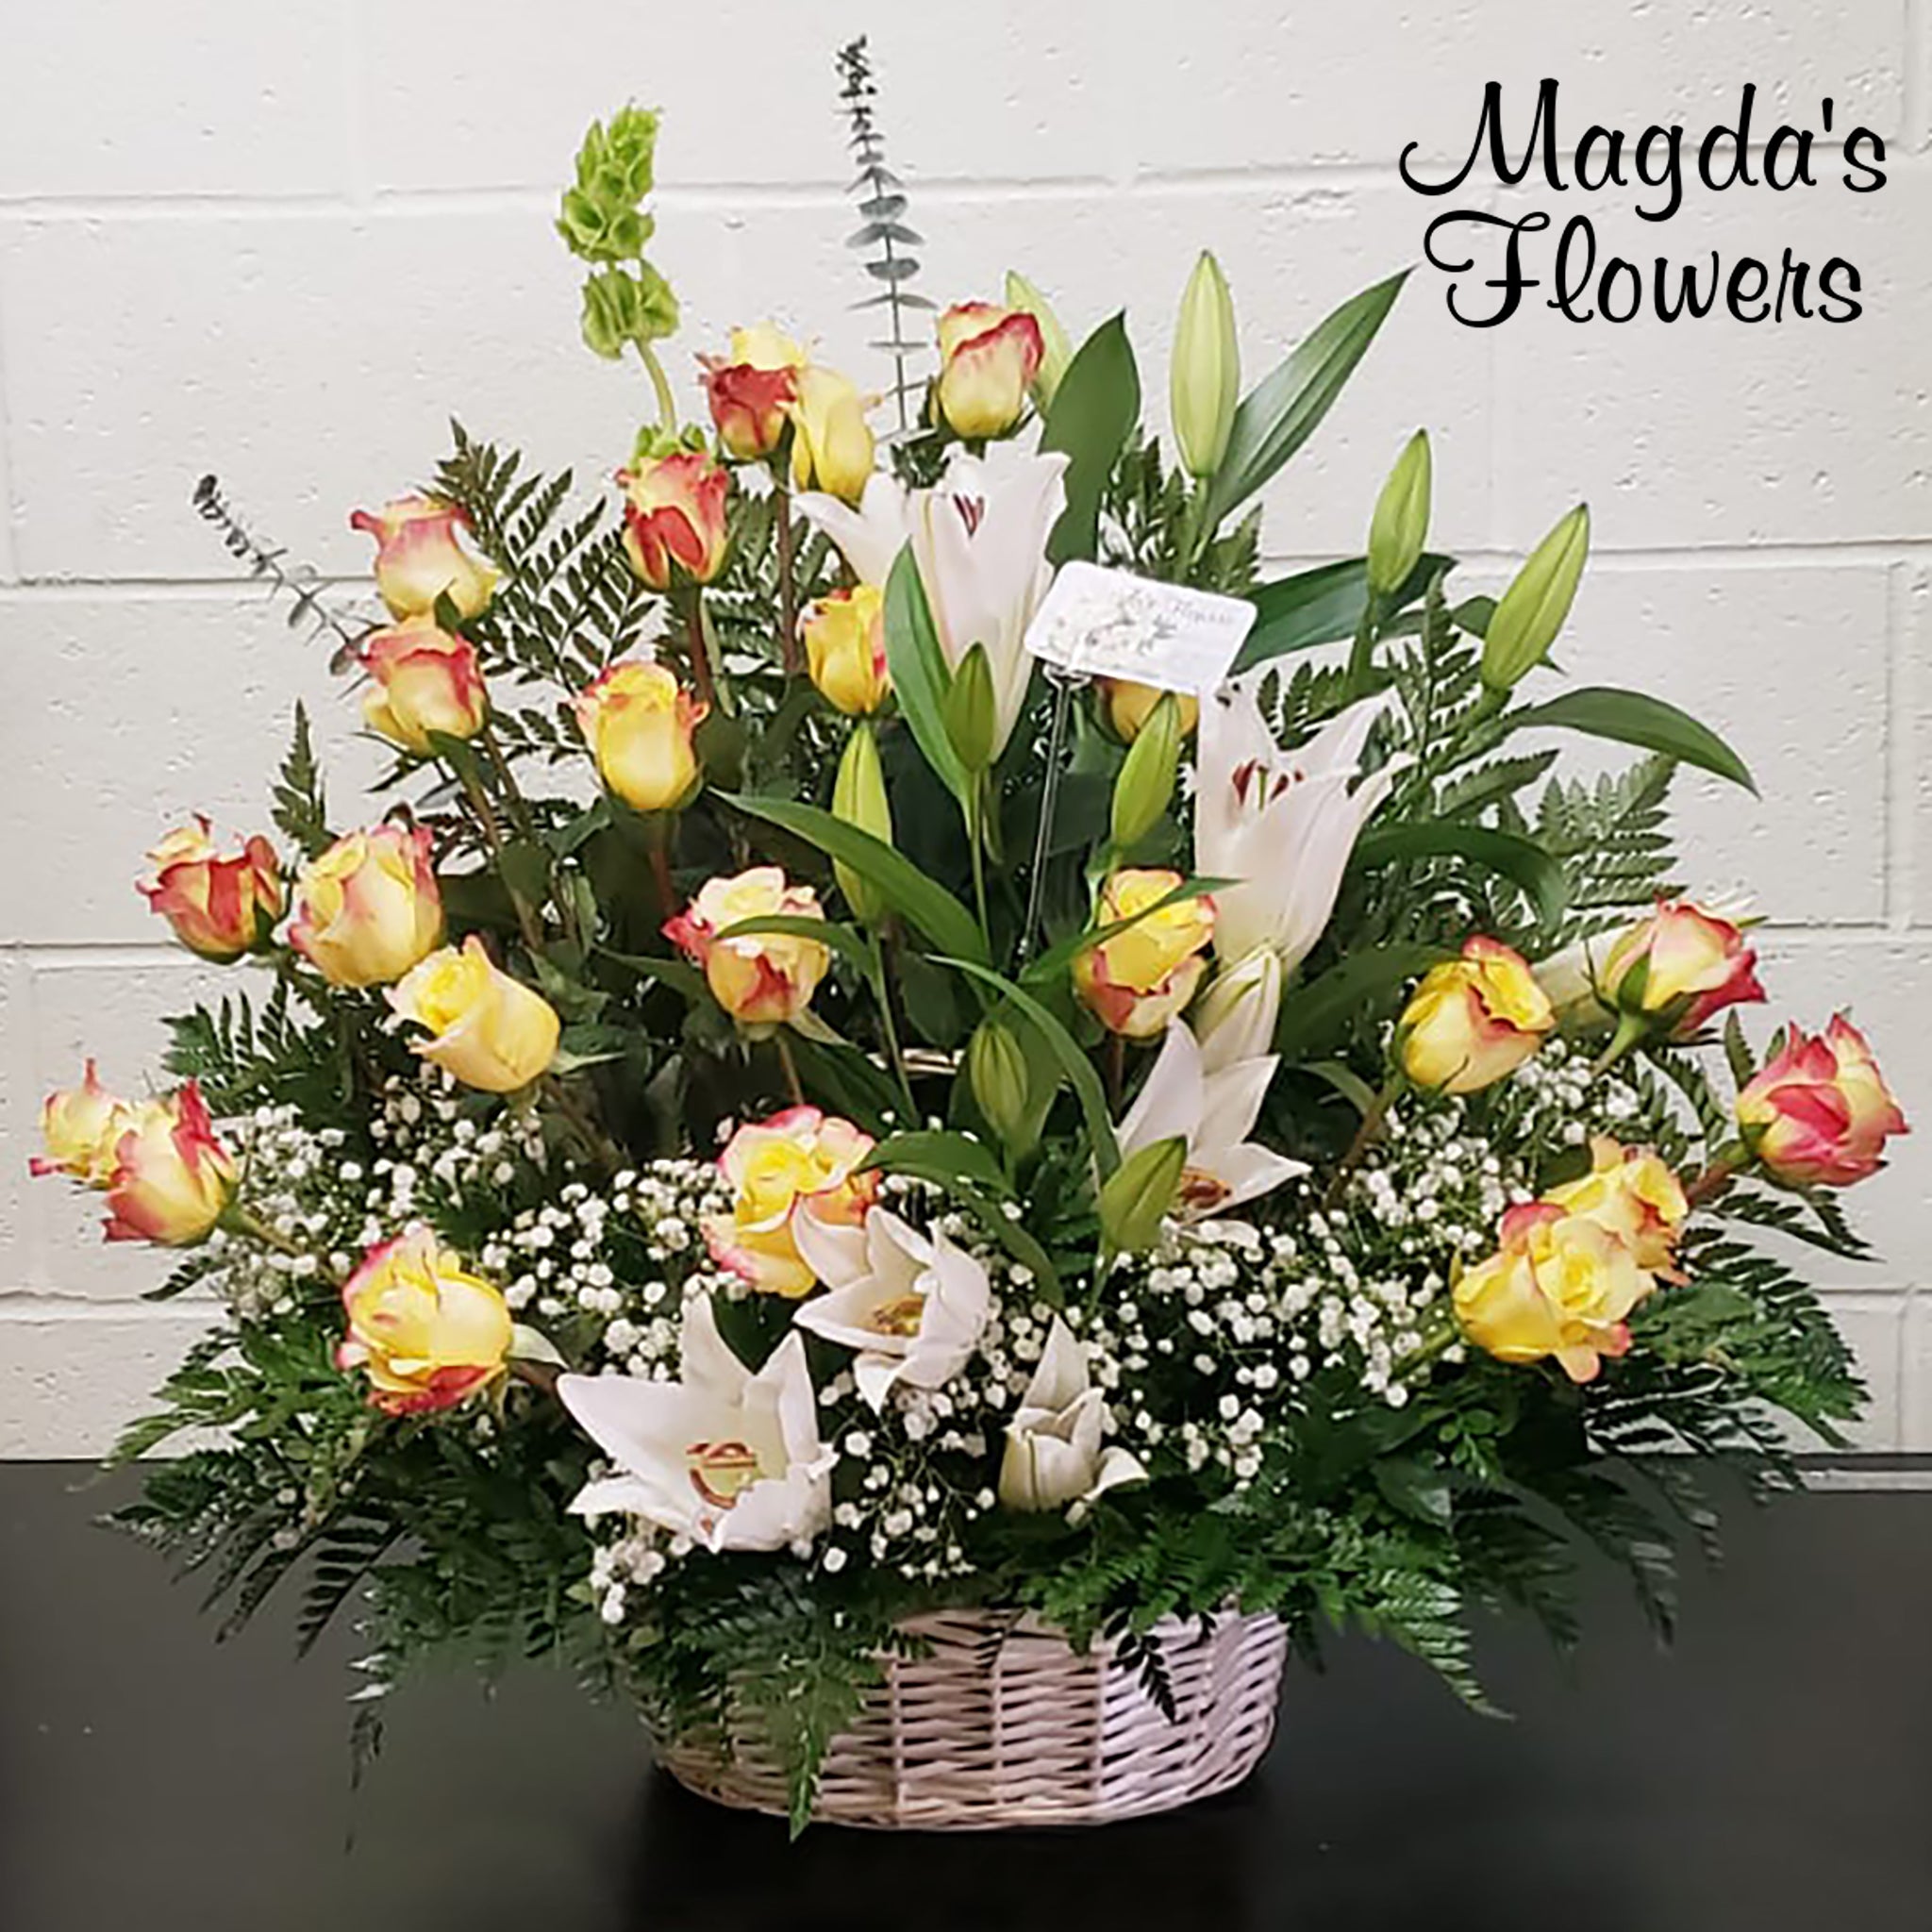 Yellow Rose, lilies, floral basket - Magdas Flowers - Salinas, California. Order flowers online for local delivery.